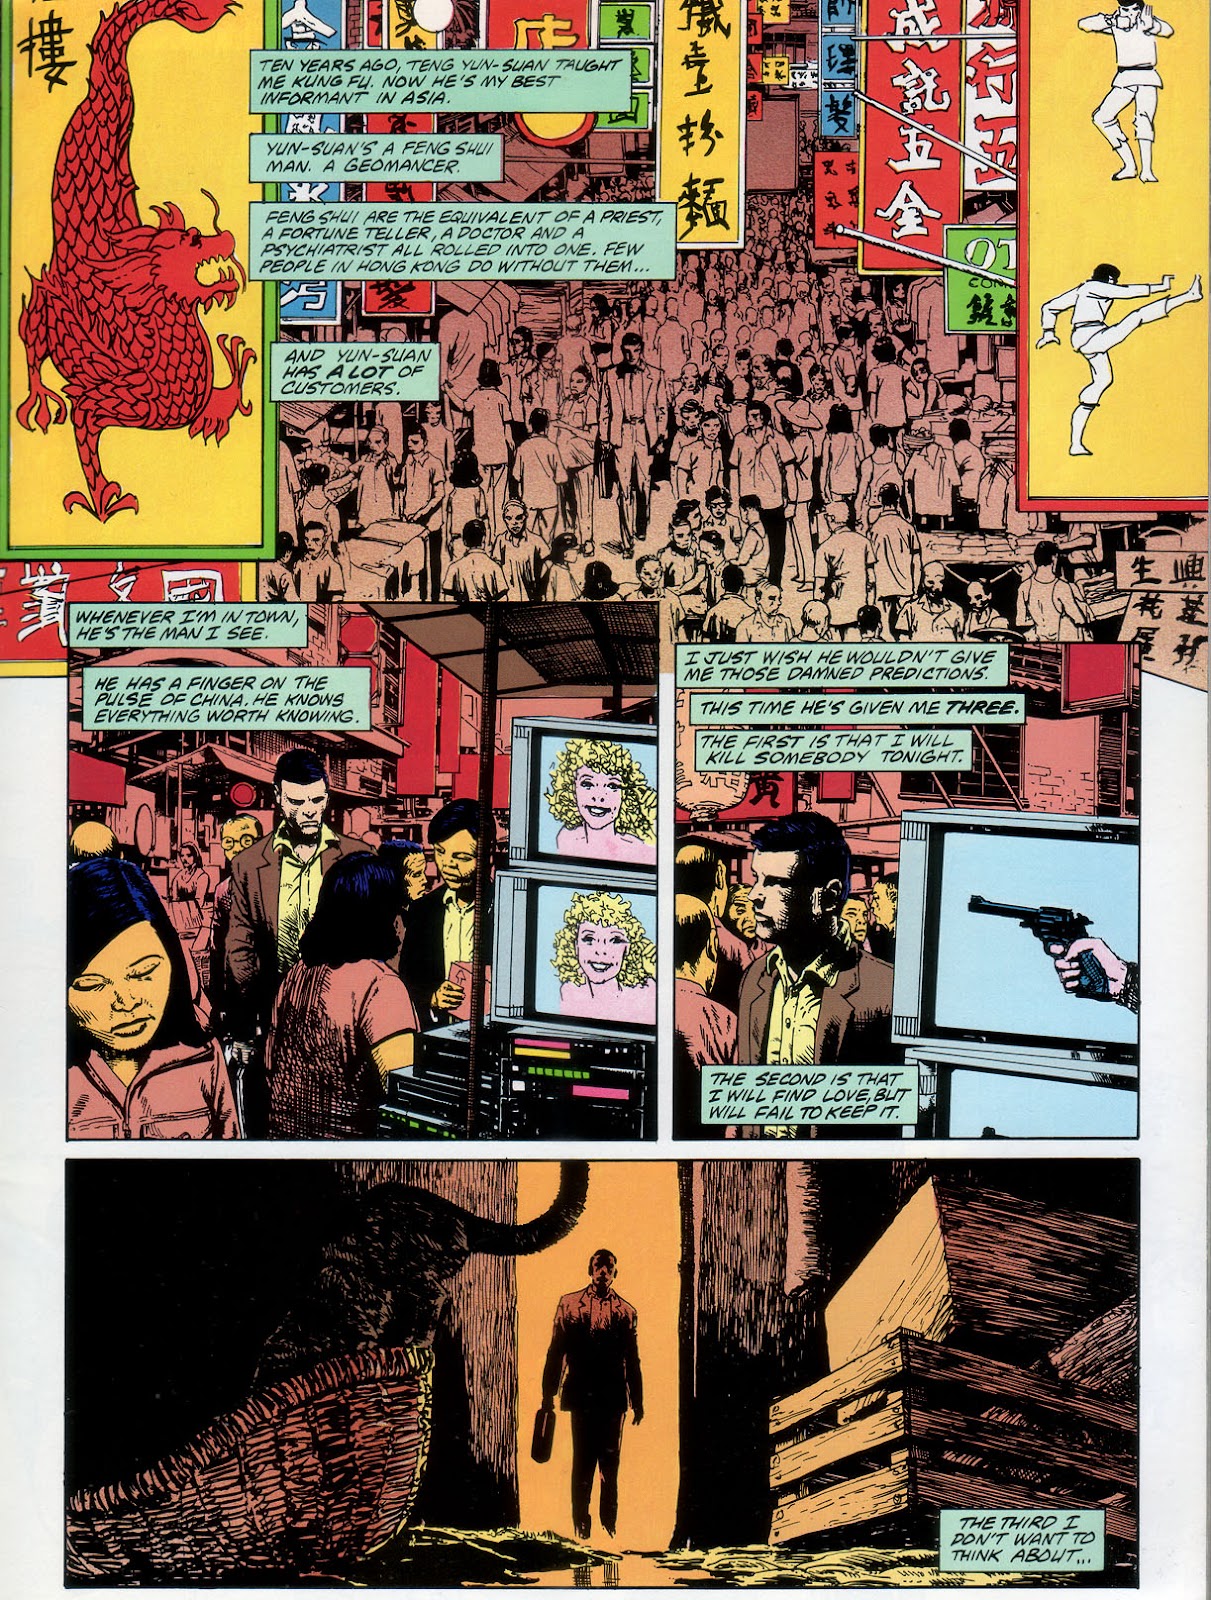 Marvel Graphic Novel issue 57 - Rick Mason - The Agent - Page 9